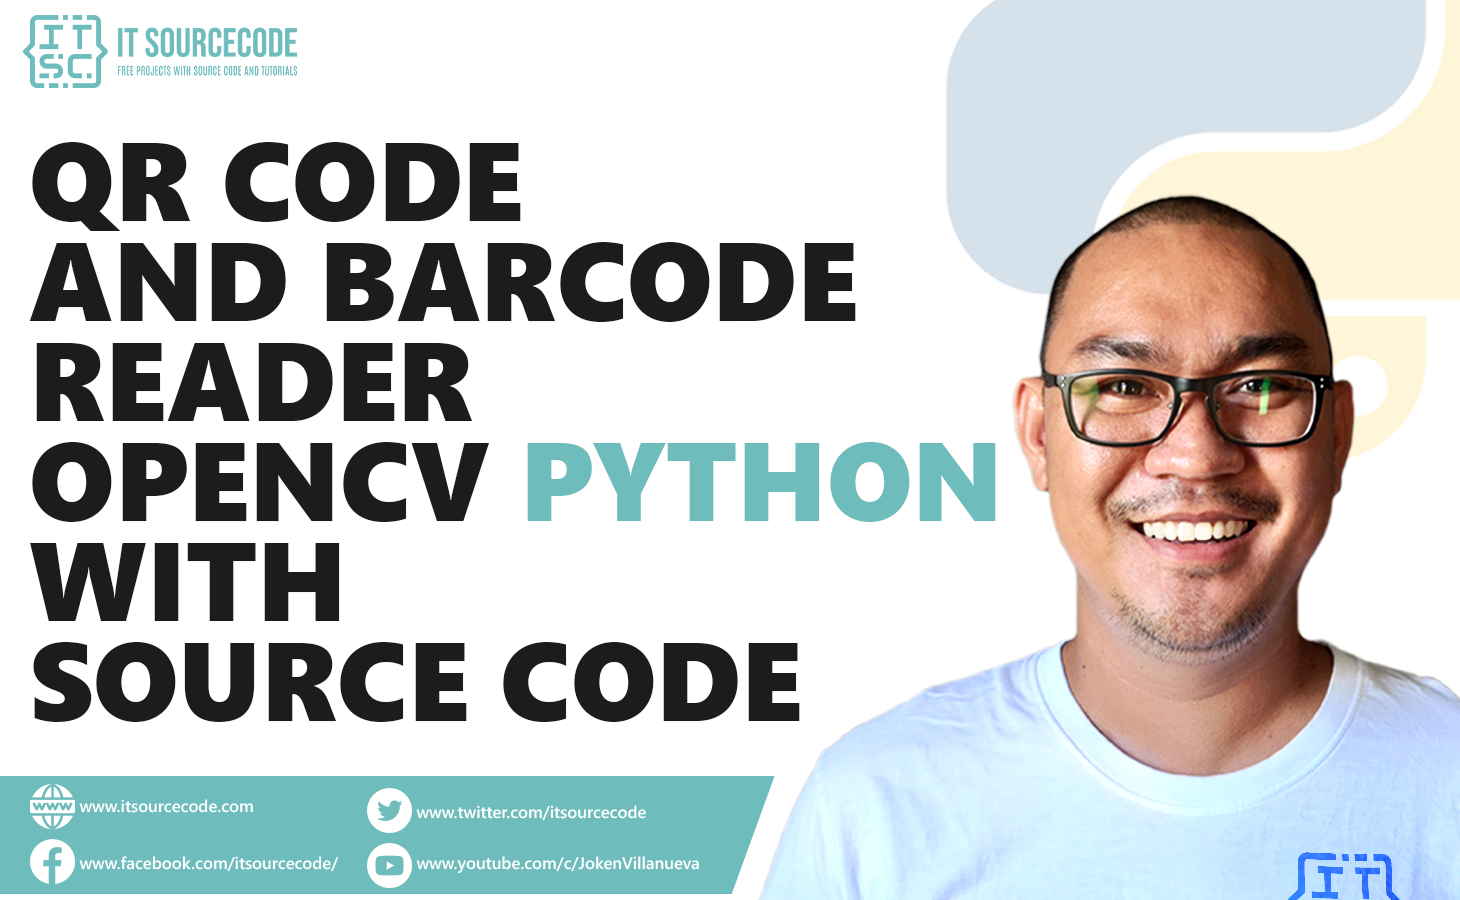 Qr Code and Barcode Reader OpenCV Python With Source Code